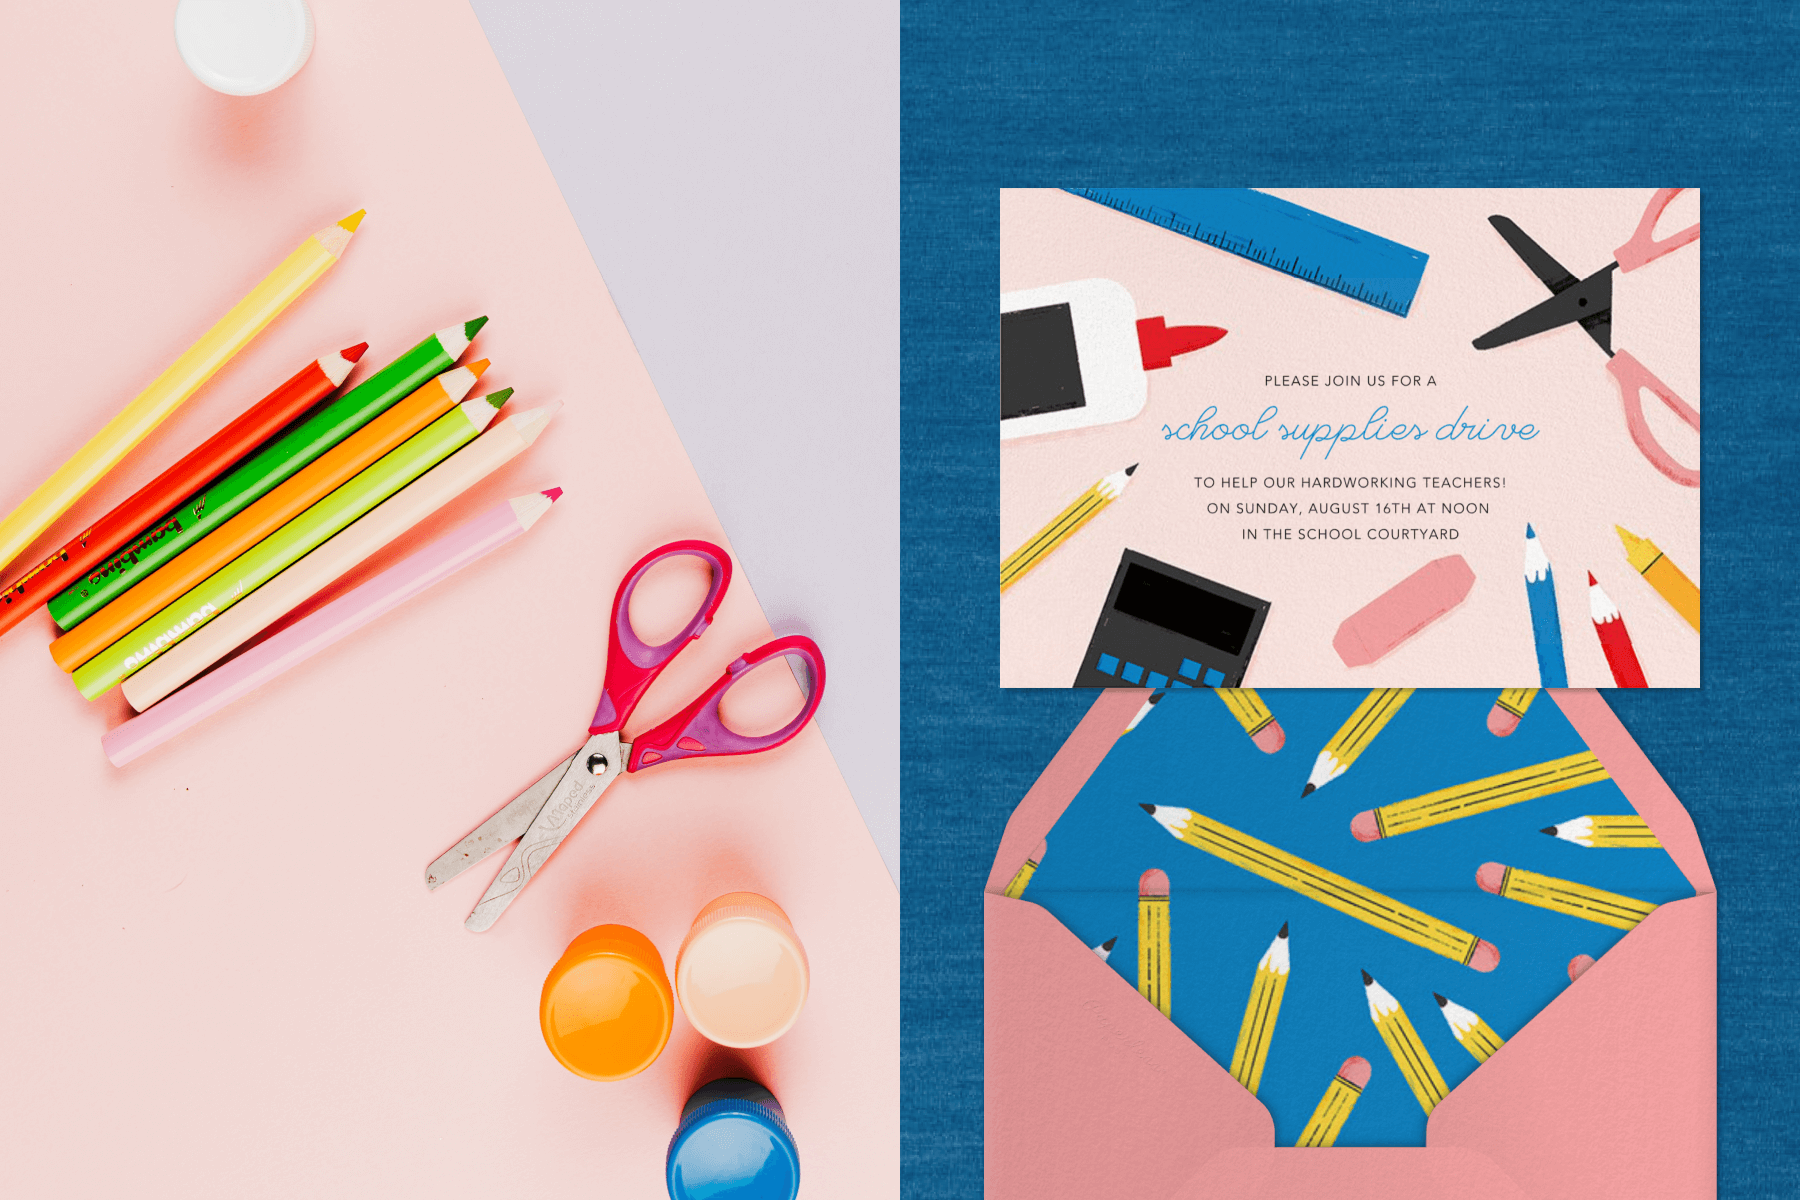 Left: Fluorescent colored pencils, children’s pink scissors, and some small round containers on a pink surface. Right: A light pink invitation for a school supplies drive with illustrated school supplies around the border on a blue backdrop, with a pink envelope with a liner of yellow pencils.